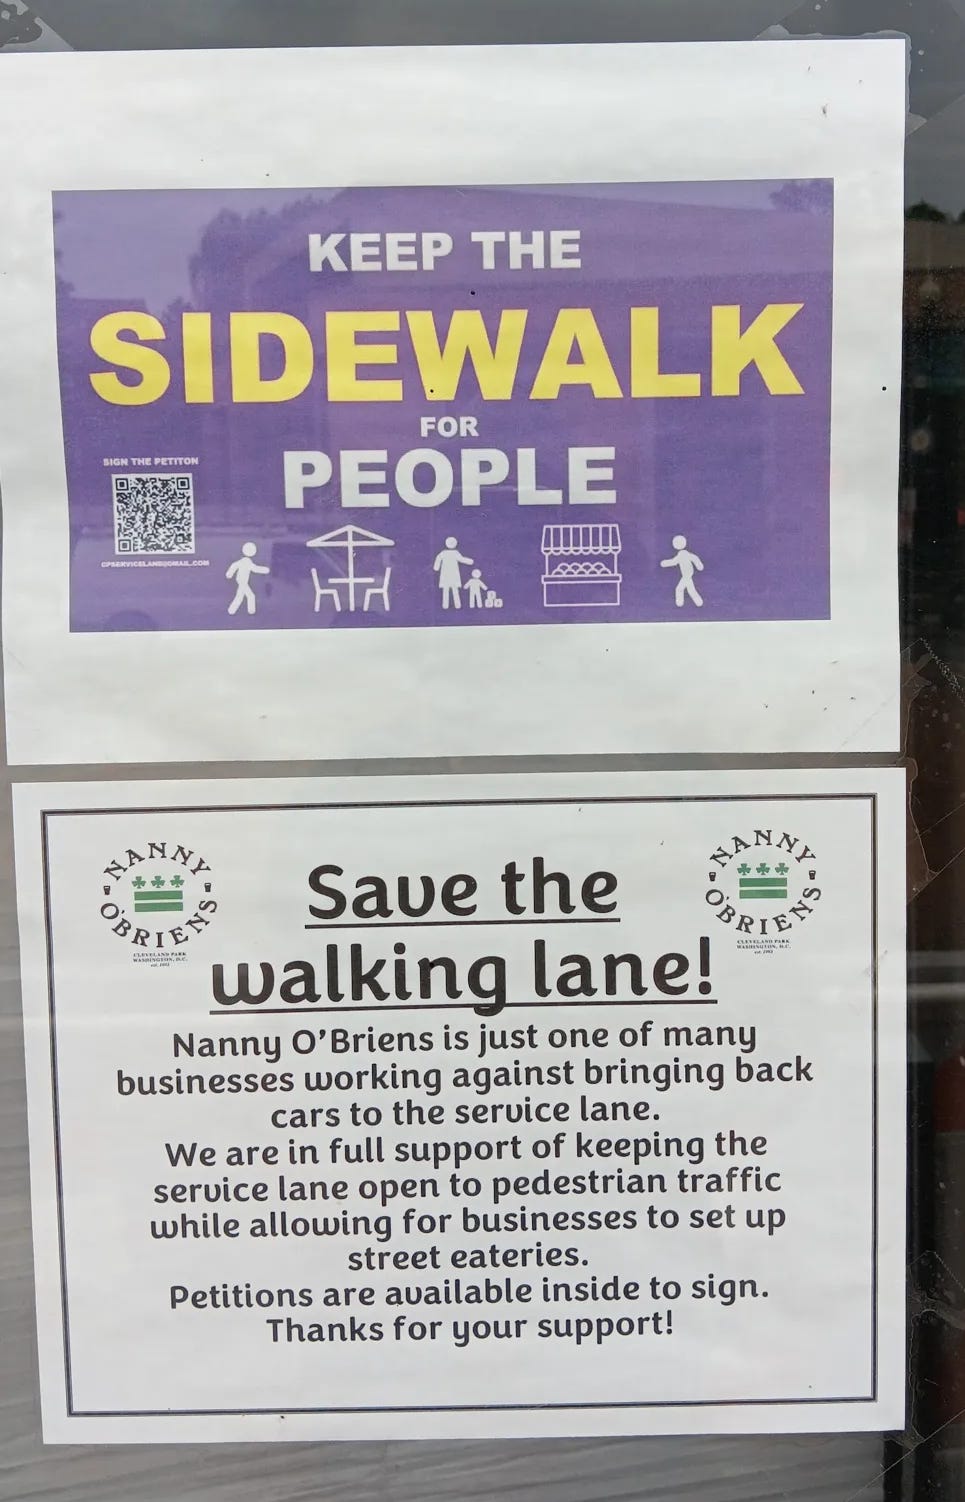 Signs posted on the storefront saying "keep the walking lane" and "keep the sidewalk for poeple"